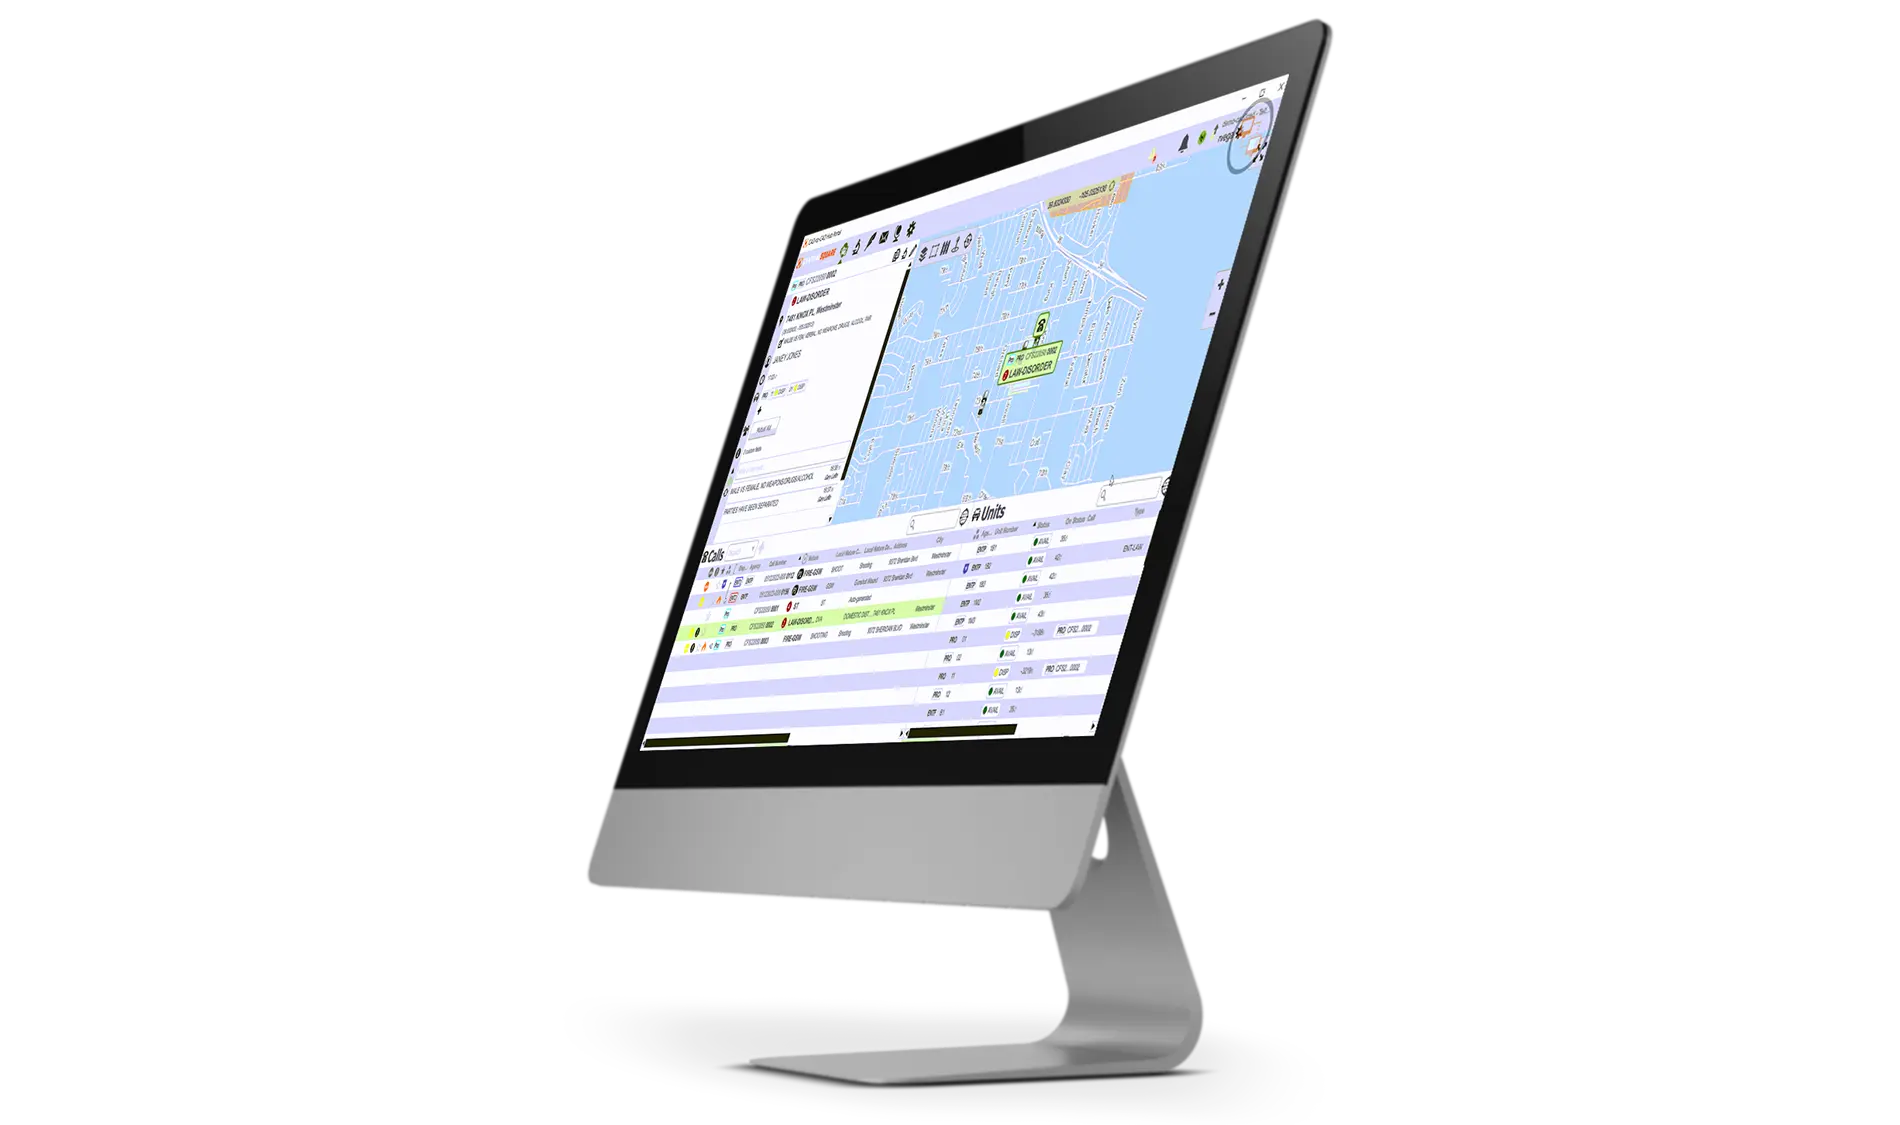 A screenshot of CentralSquare's Unify (CAD-to-CAD) platform on a computer monitor.